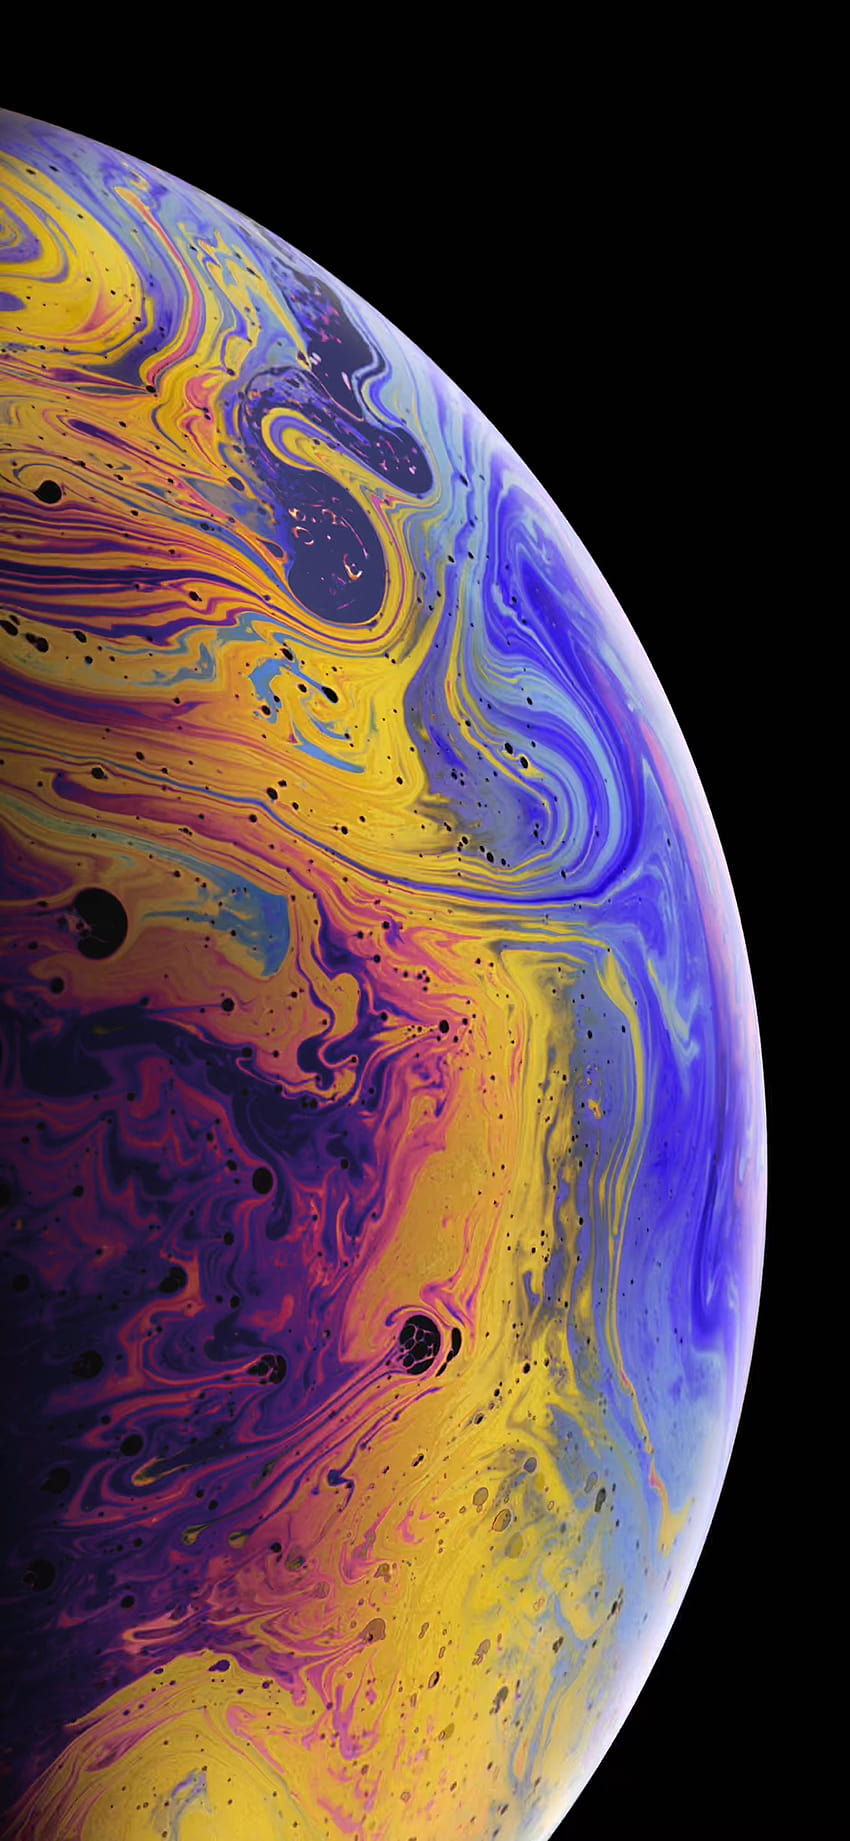 HD wallpaper: Earth, Planet, Bubble, Yellow, Red, iPhone XR, iOS 12, Stock  | Wallpaper Flare